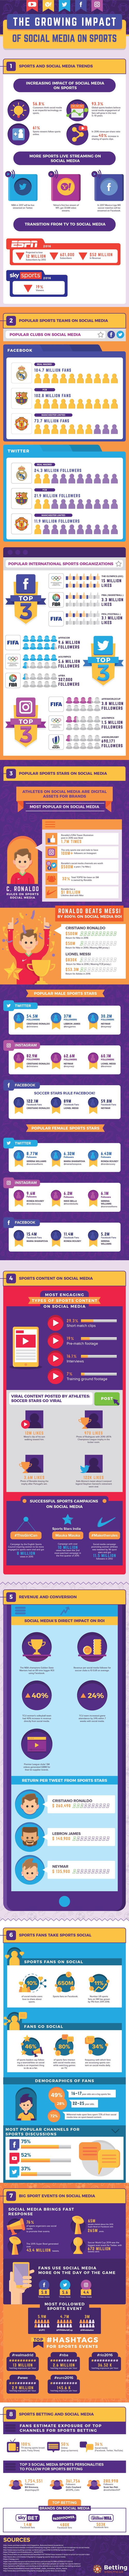 The Growing Impact of Social Media on Sports [Infographic]